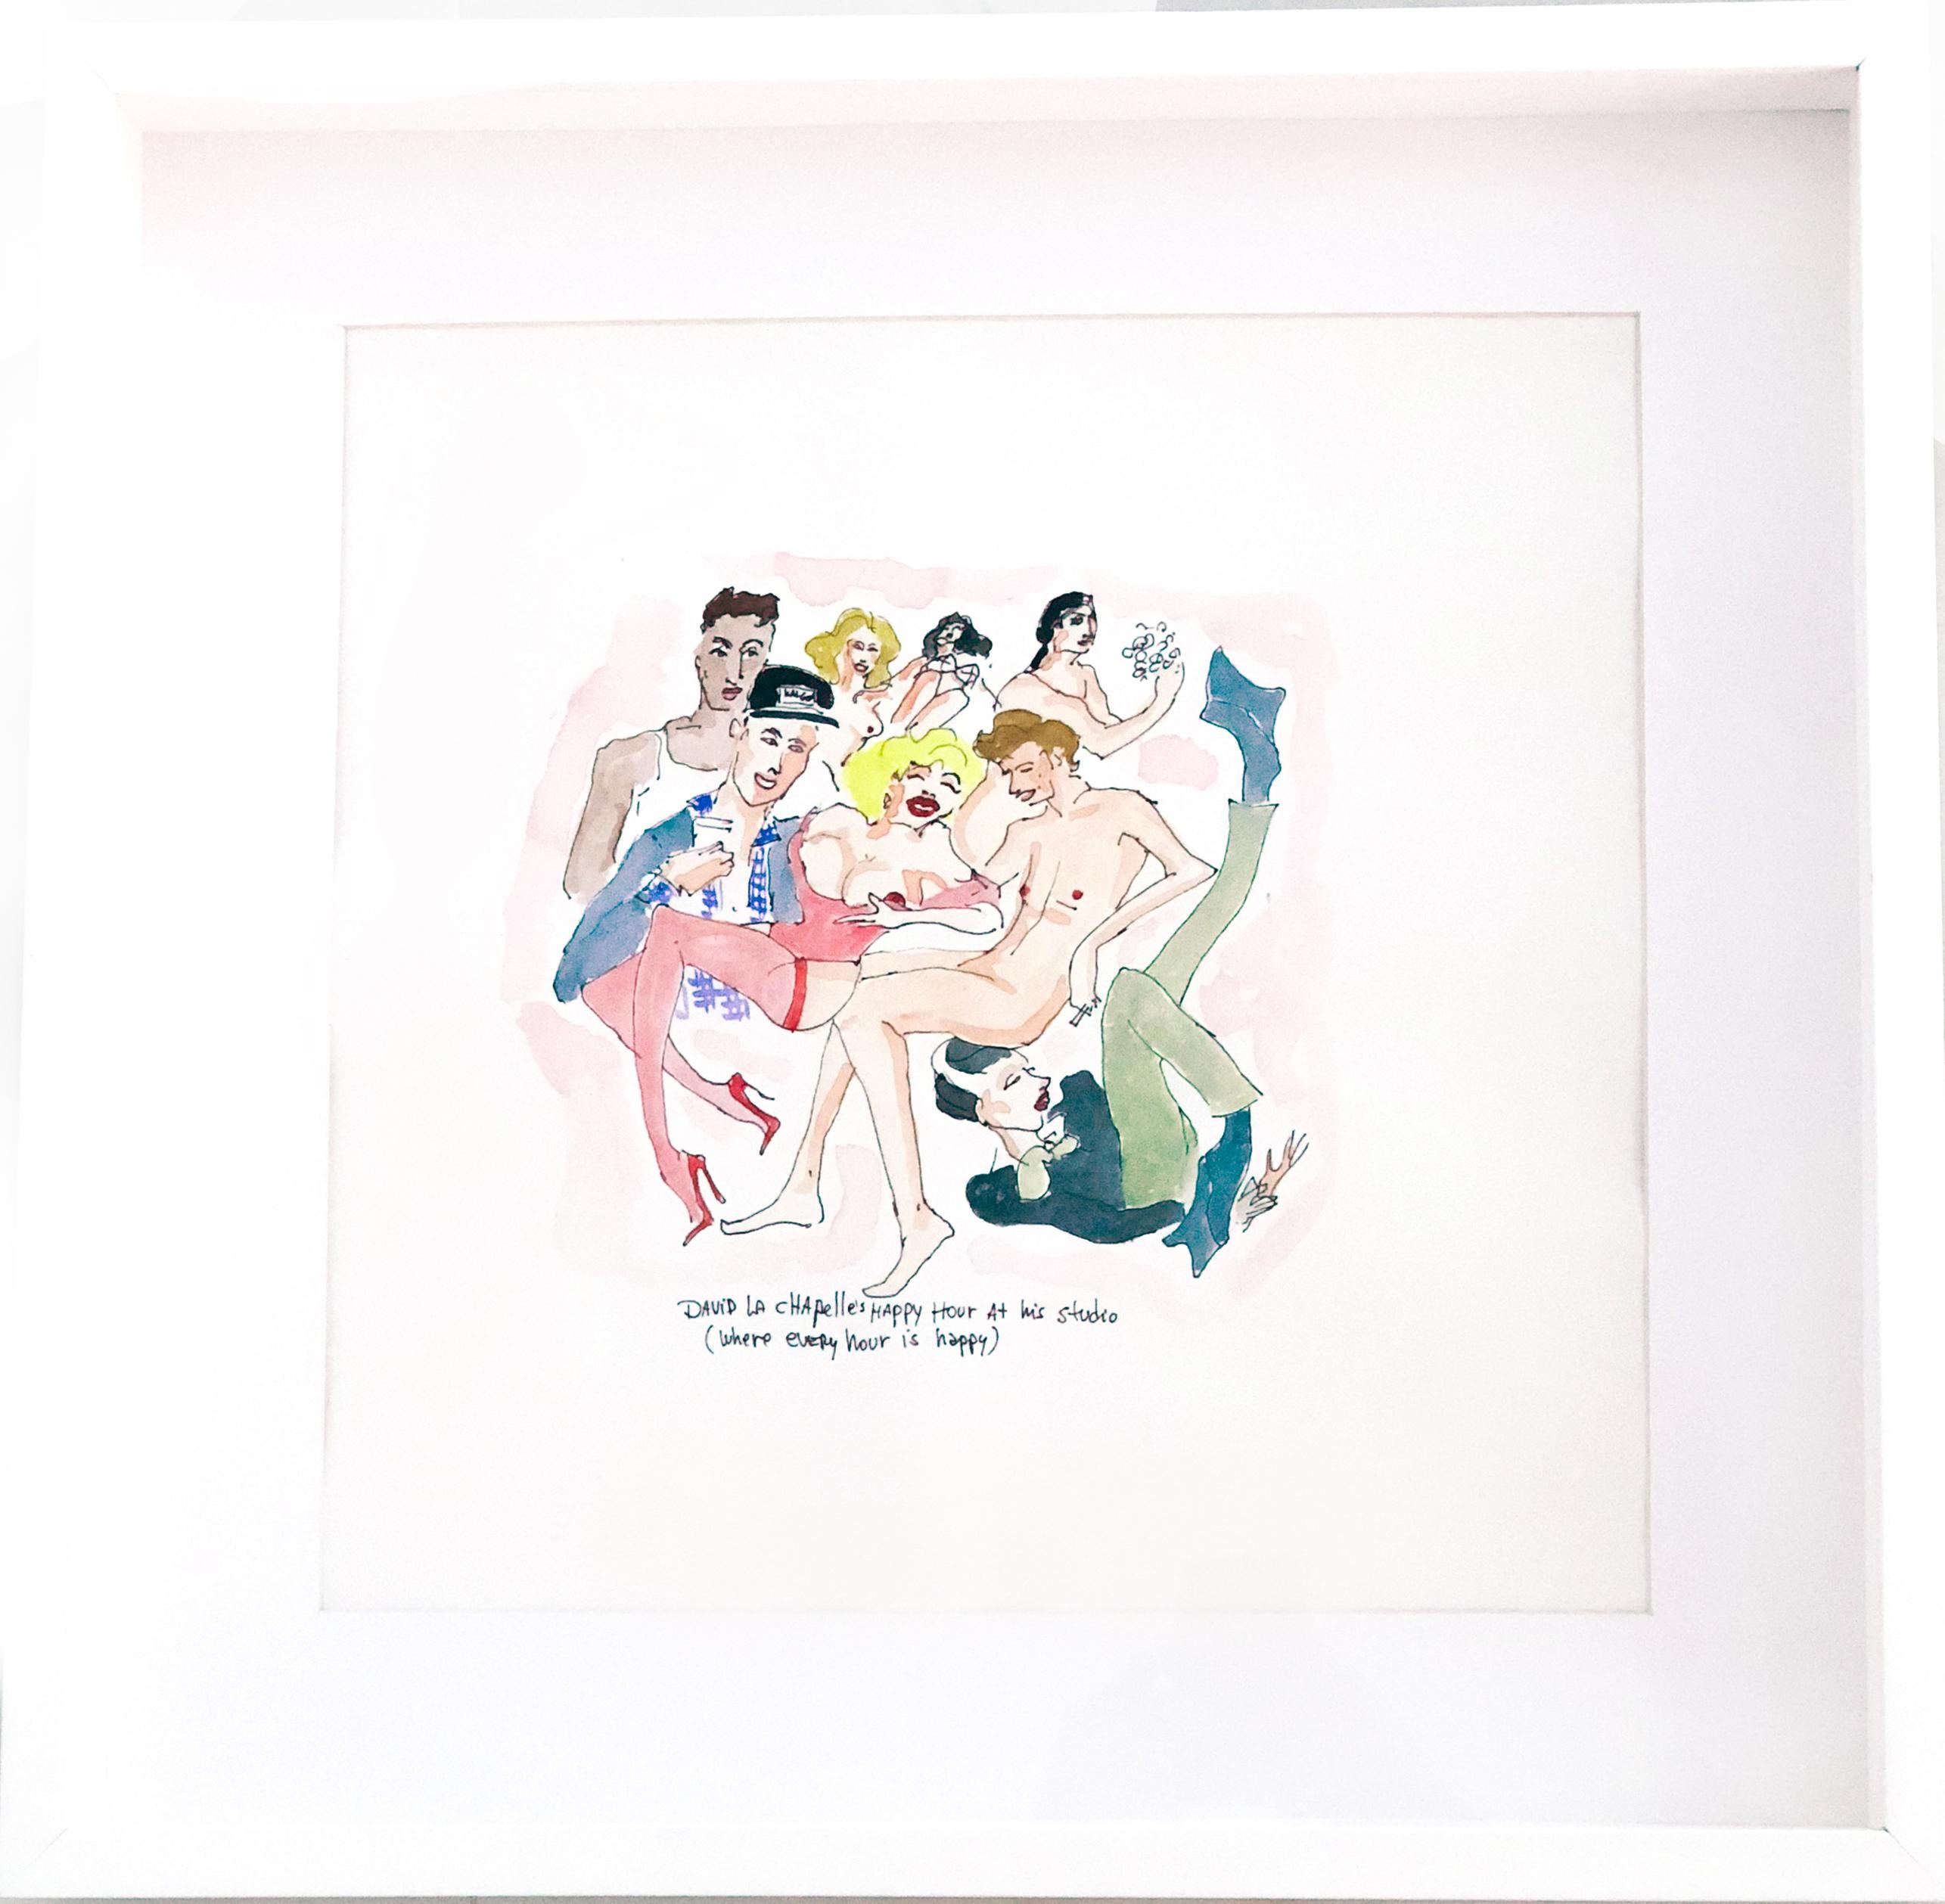 Manuel Santelices Figurative Art – Happy hour at David LaChapelle - One of a kind watercolor, Framed